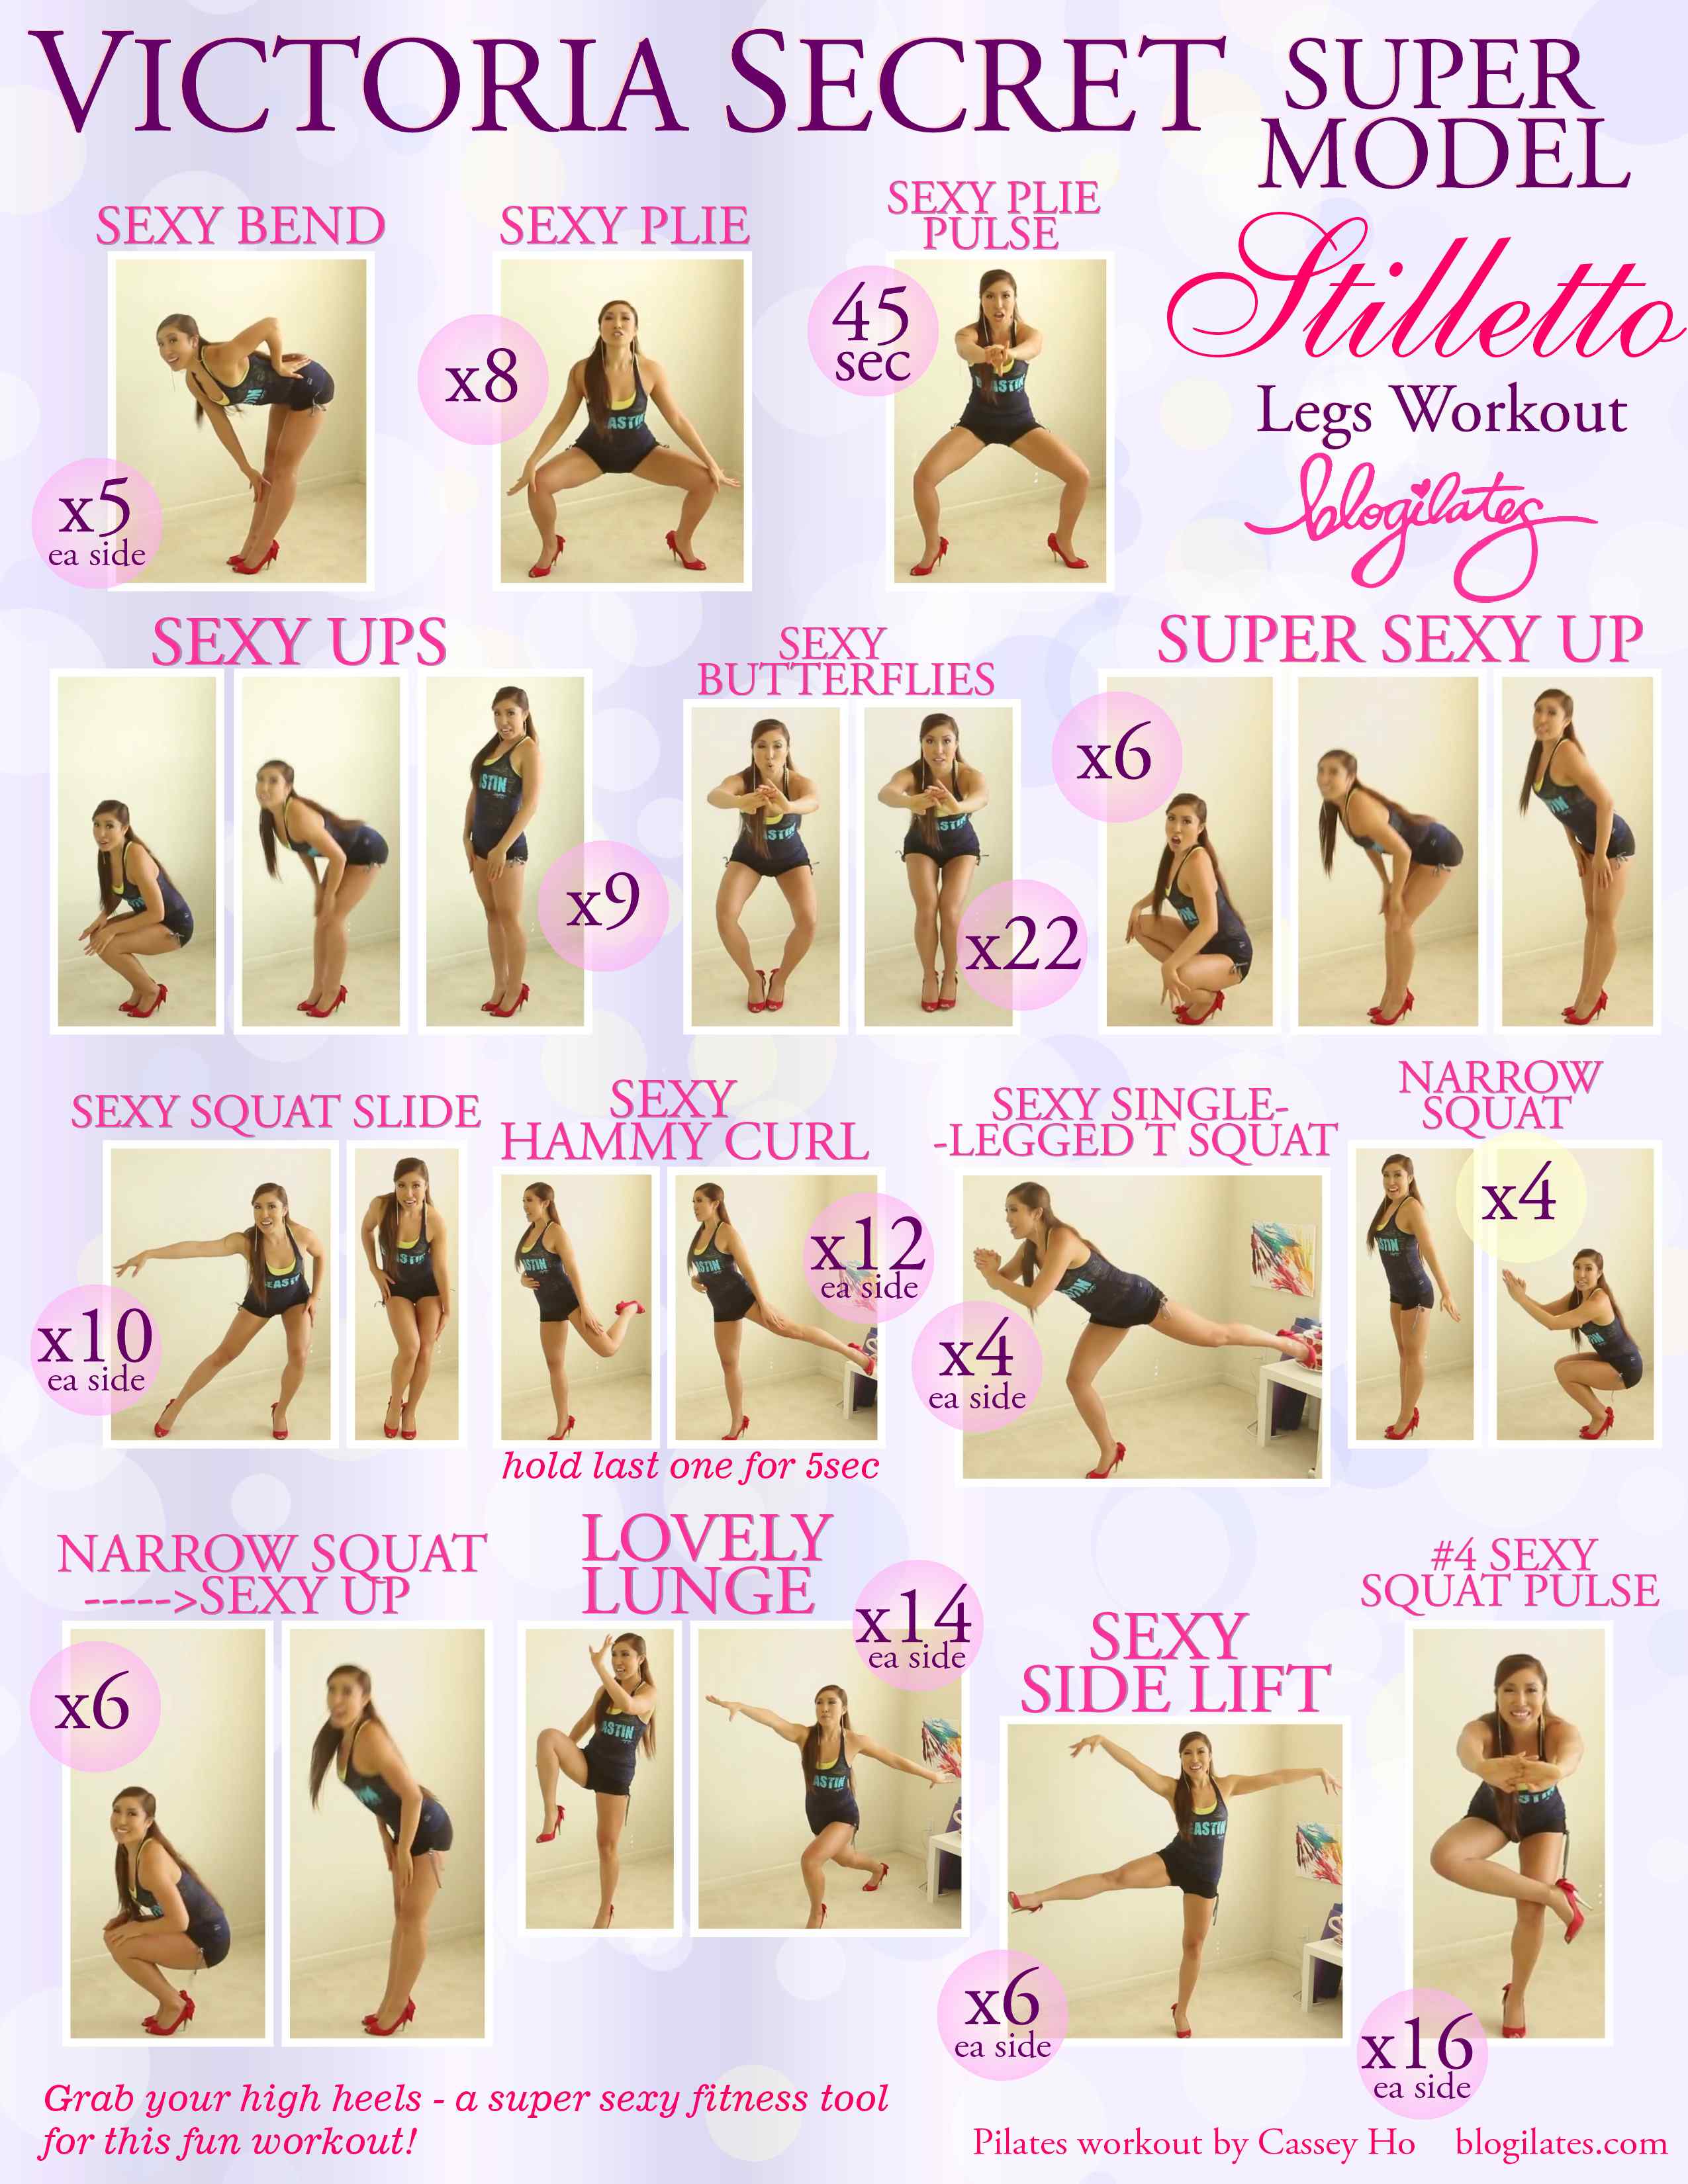 Stretching After Workouts To Get In Shape: 's Cassey H's